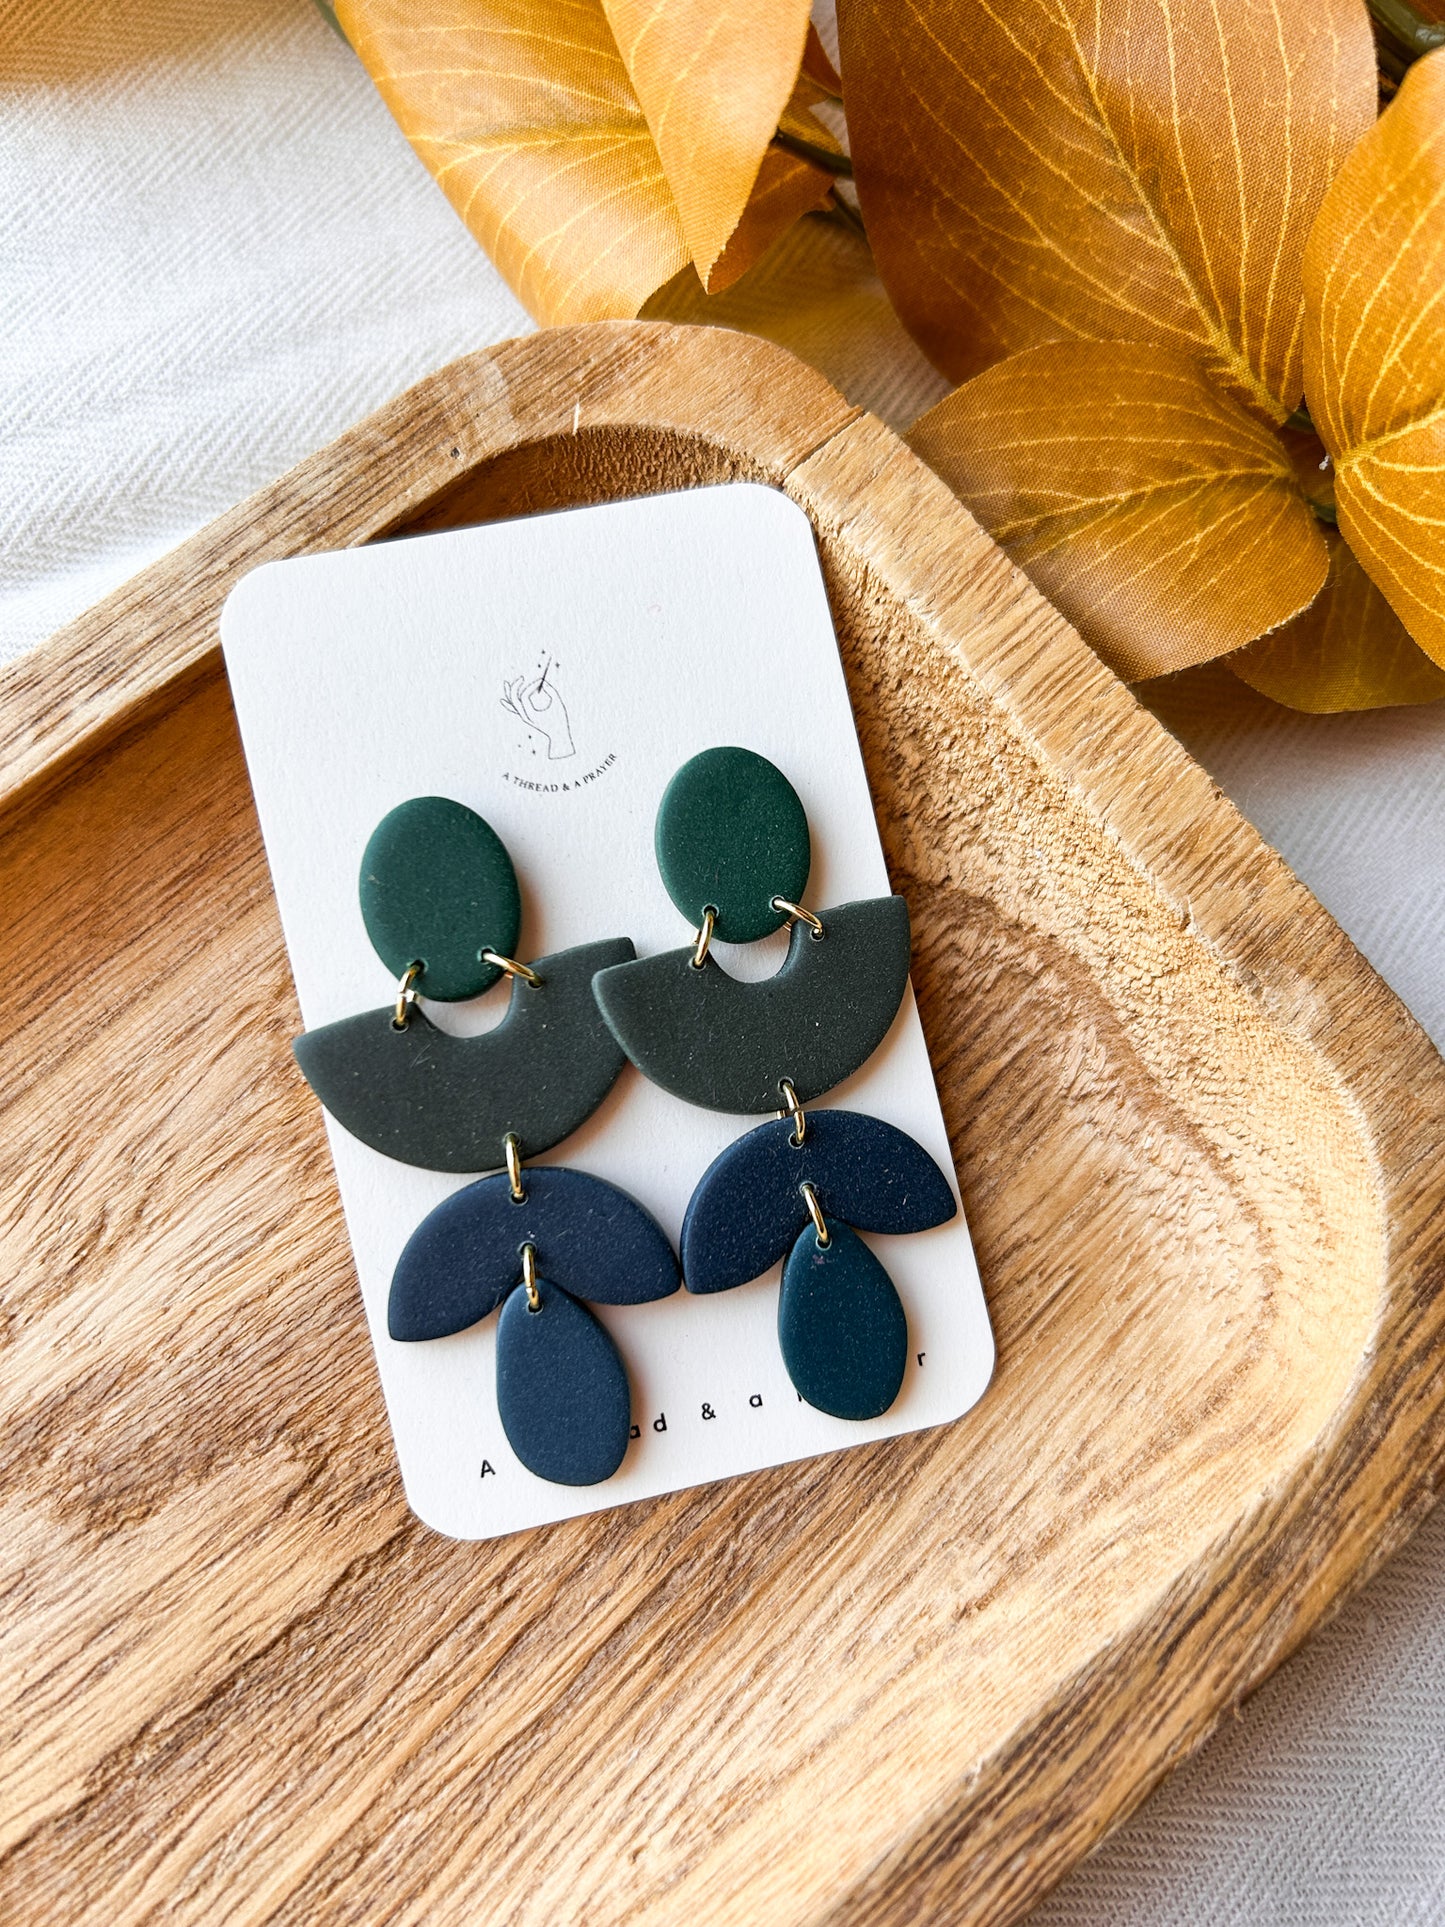 Green and Blue Statement Clay Autumn Earrings | Fall Fashion | Autumn Earrings | Statement Earrings | Lightweight